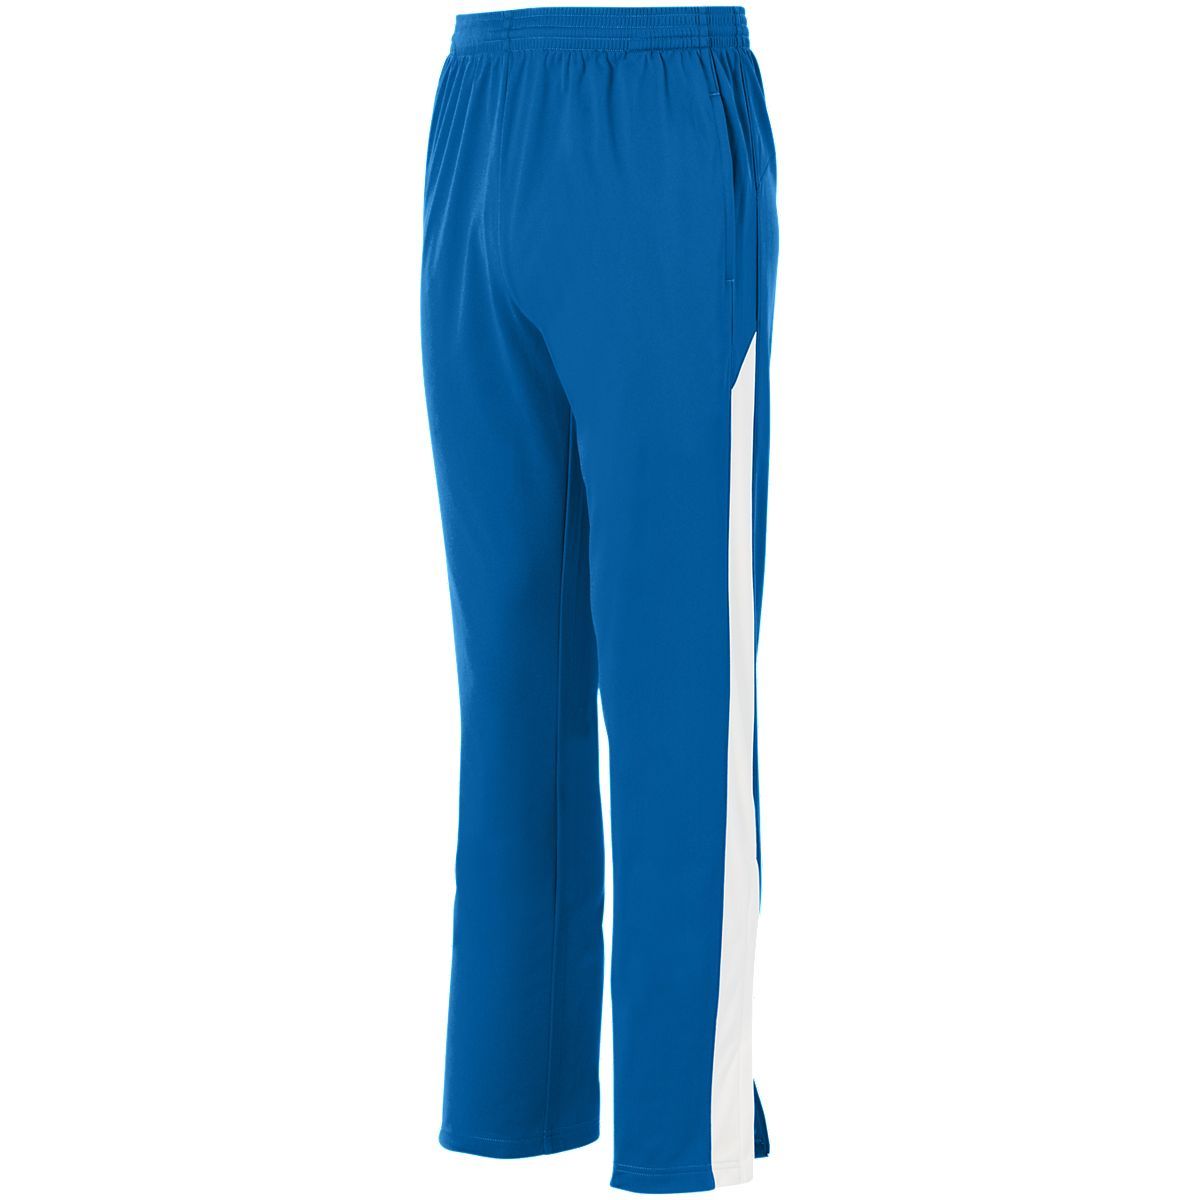 Augusta Sportswear Youth Medalist Pant 2.0 in Royal/White  -Part of the Youth, Youth-Pants, Pants, Augusta-Products product lines at KanaleyCreations.com